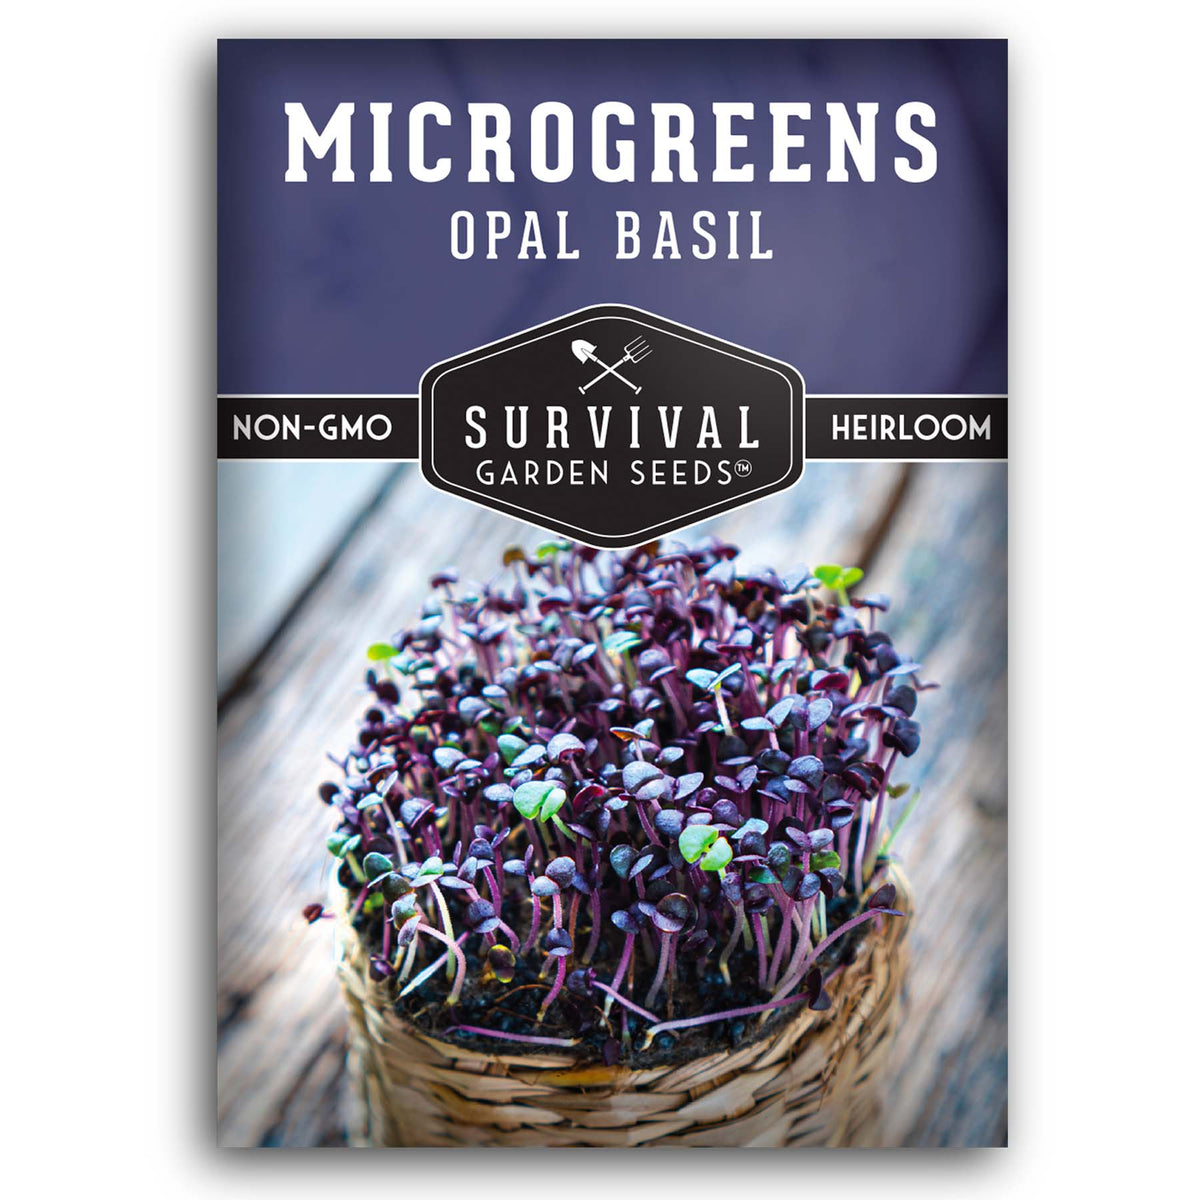 Opal Basil Microgreens seeds for sprouting